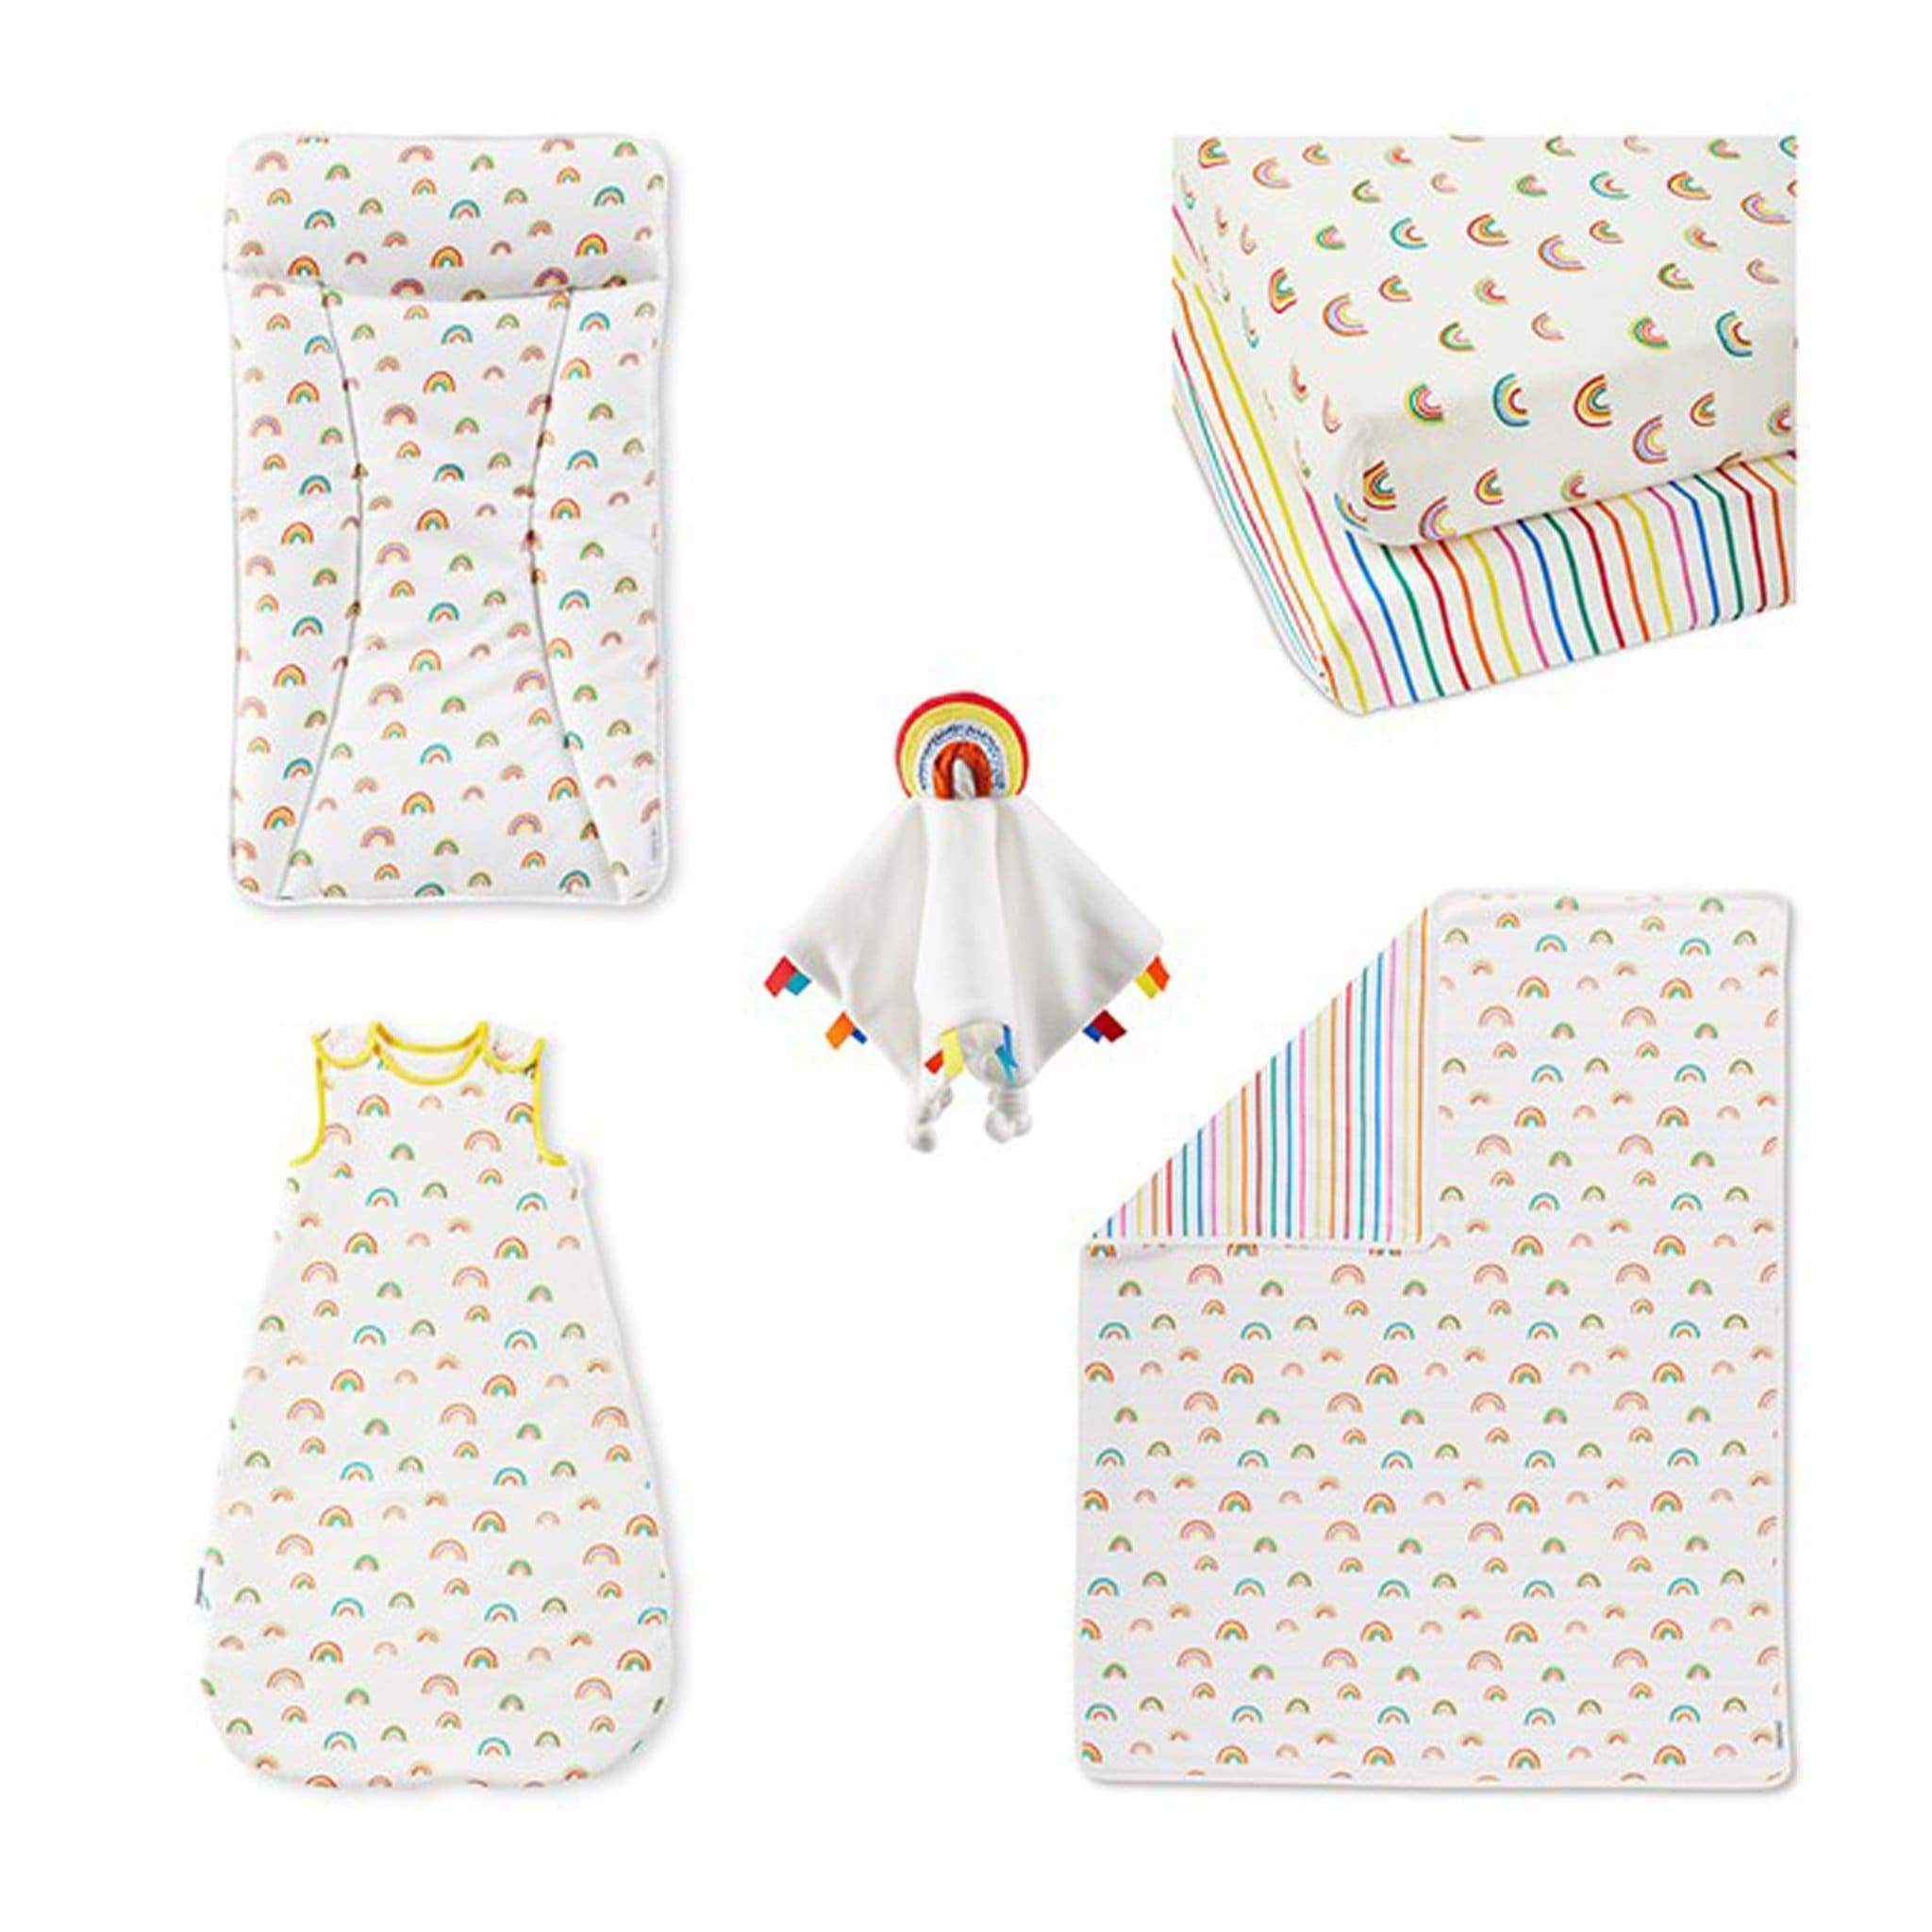 Ickle Bubba nursery bedding sets Ickle Bubba Rainbow Dreams Collection 6pc Nursery Starter Set 80-001-006-110